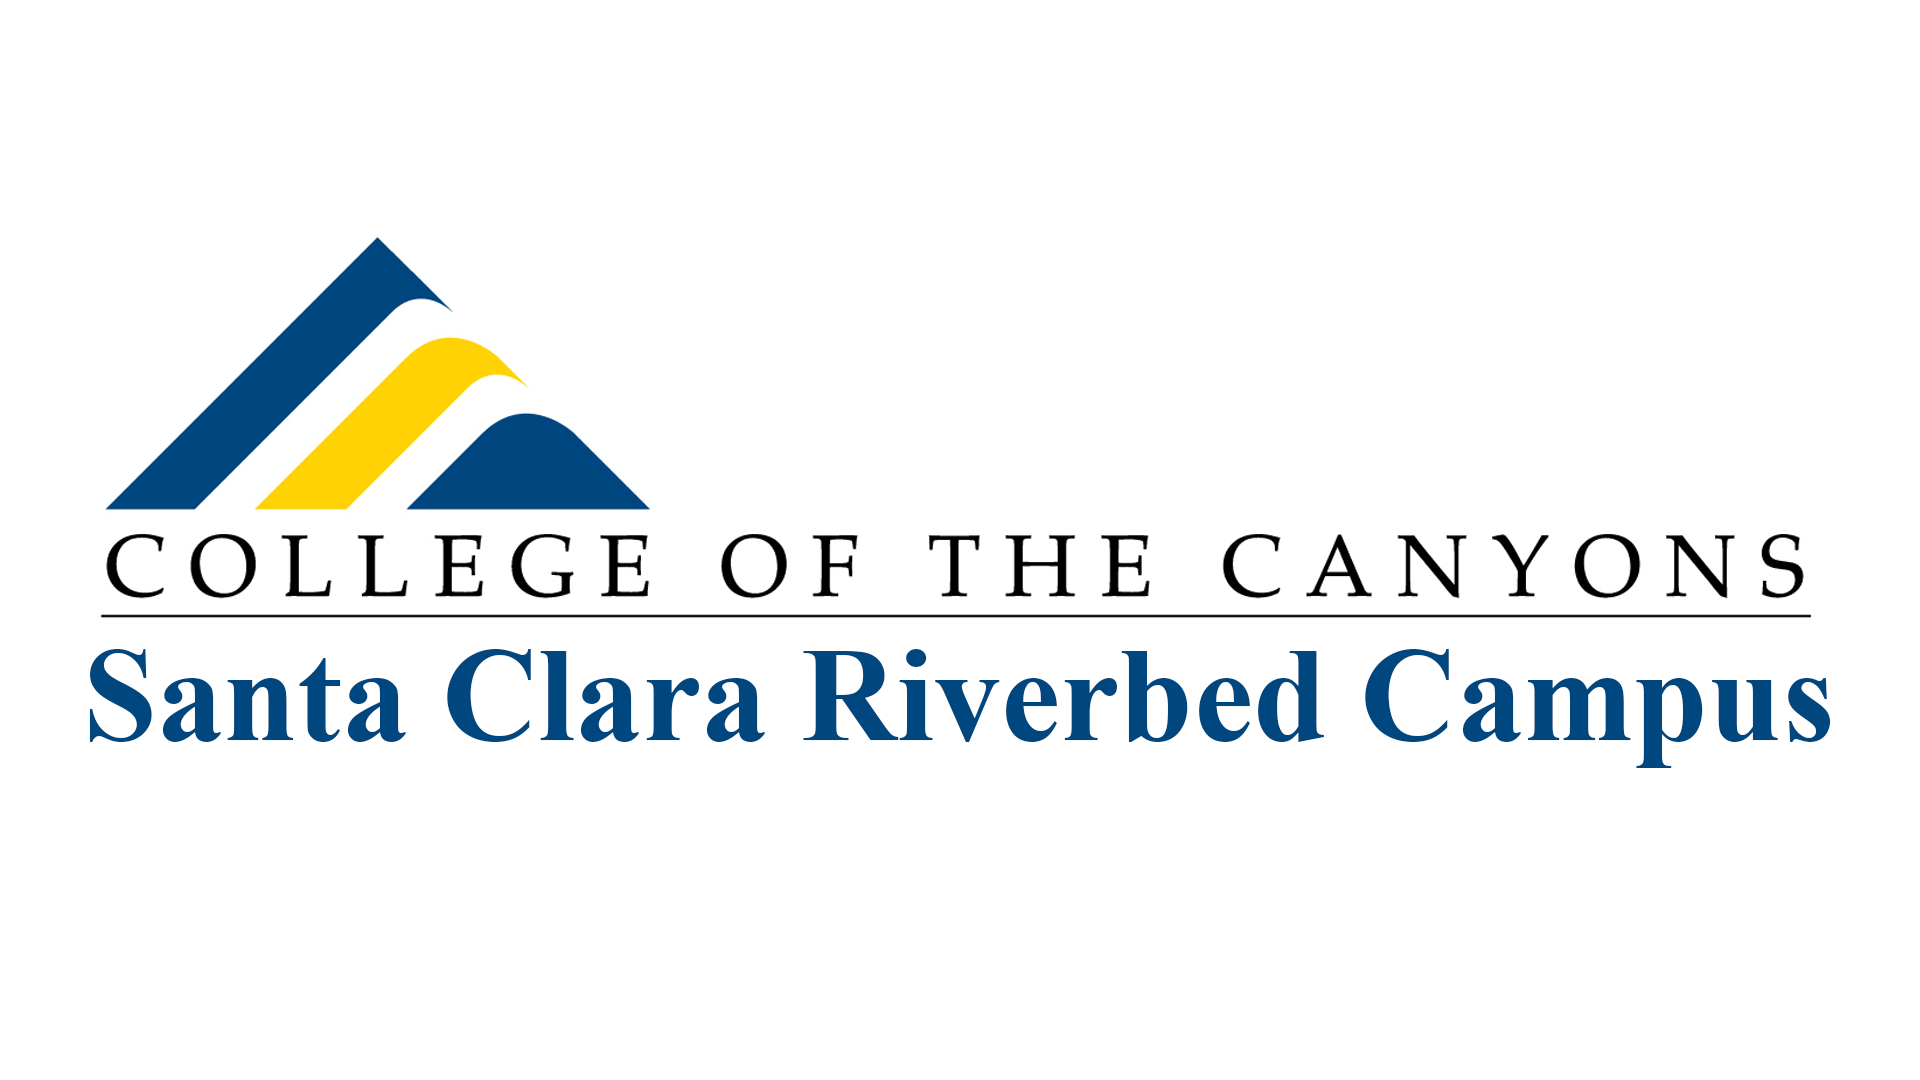 College of the Canyons to Open Santa Clara Riverbed Campus